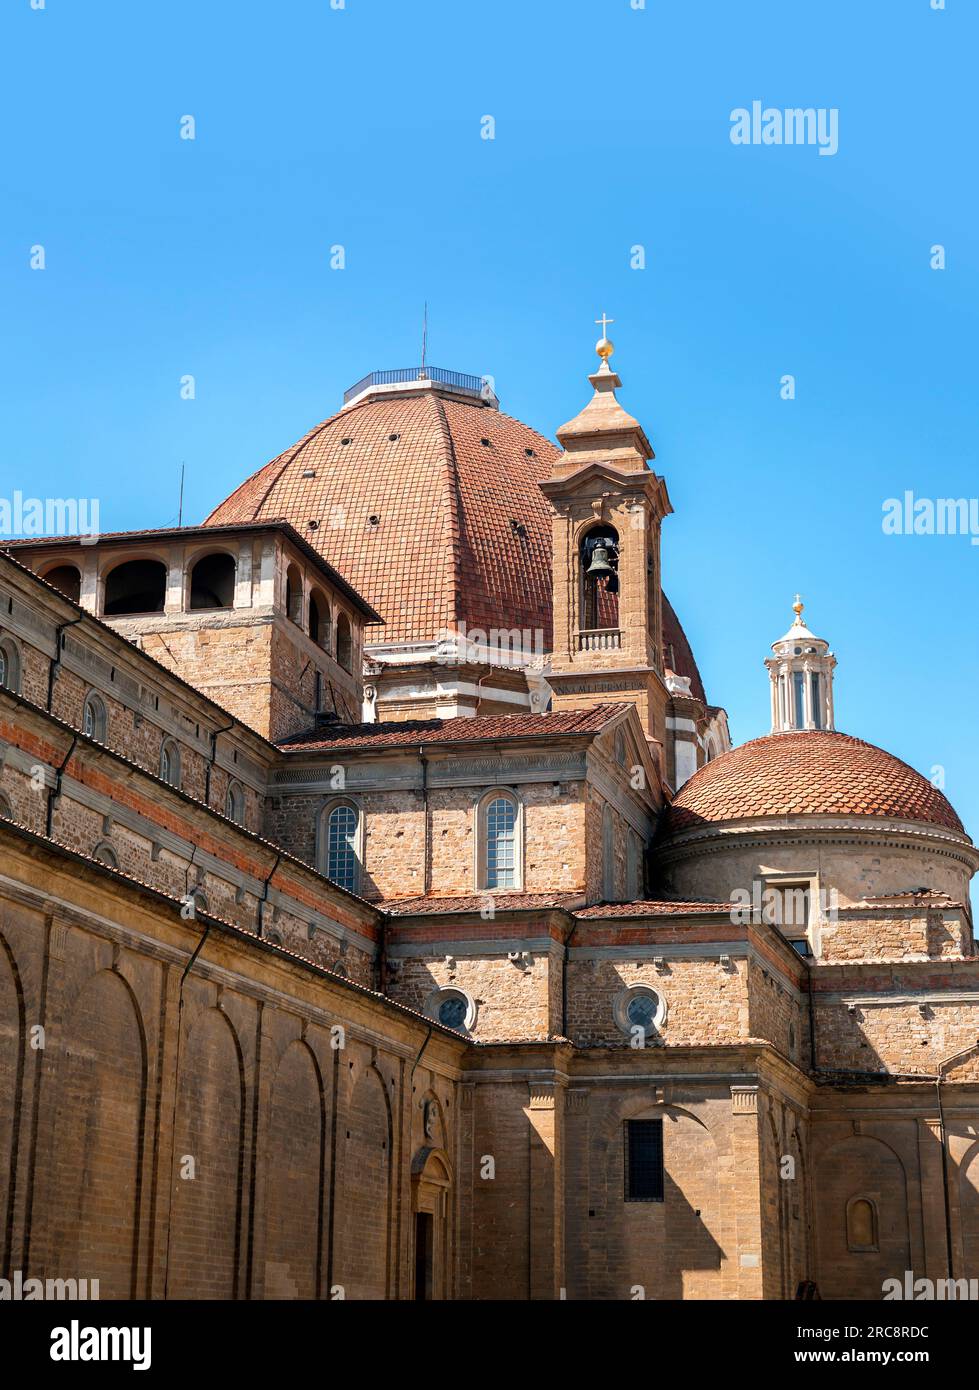 Basilica di San Lorenzo, Basilica of St Lawrence is one of the largest ...